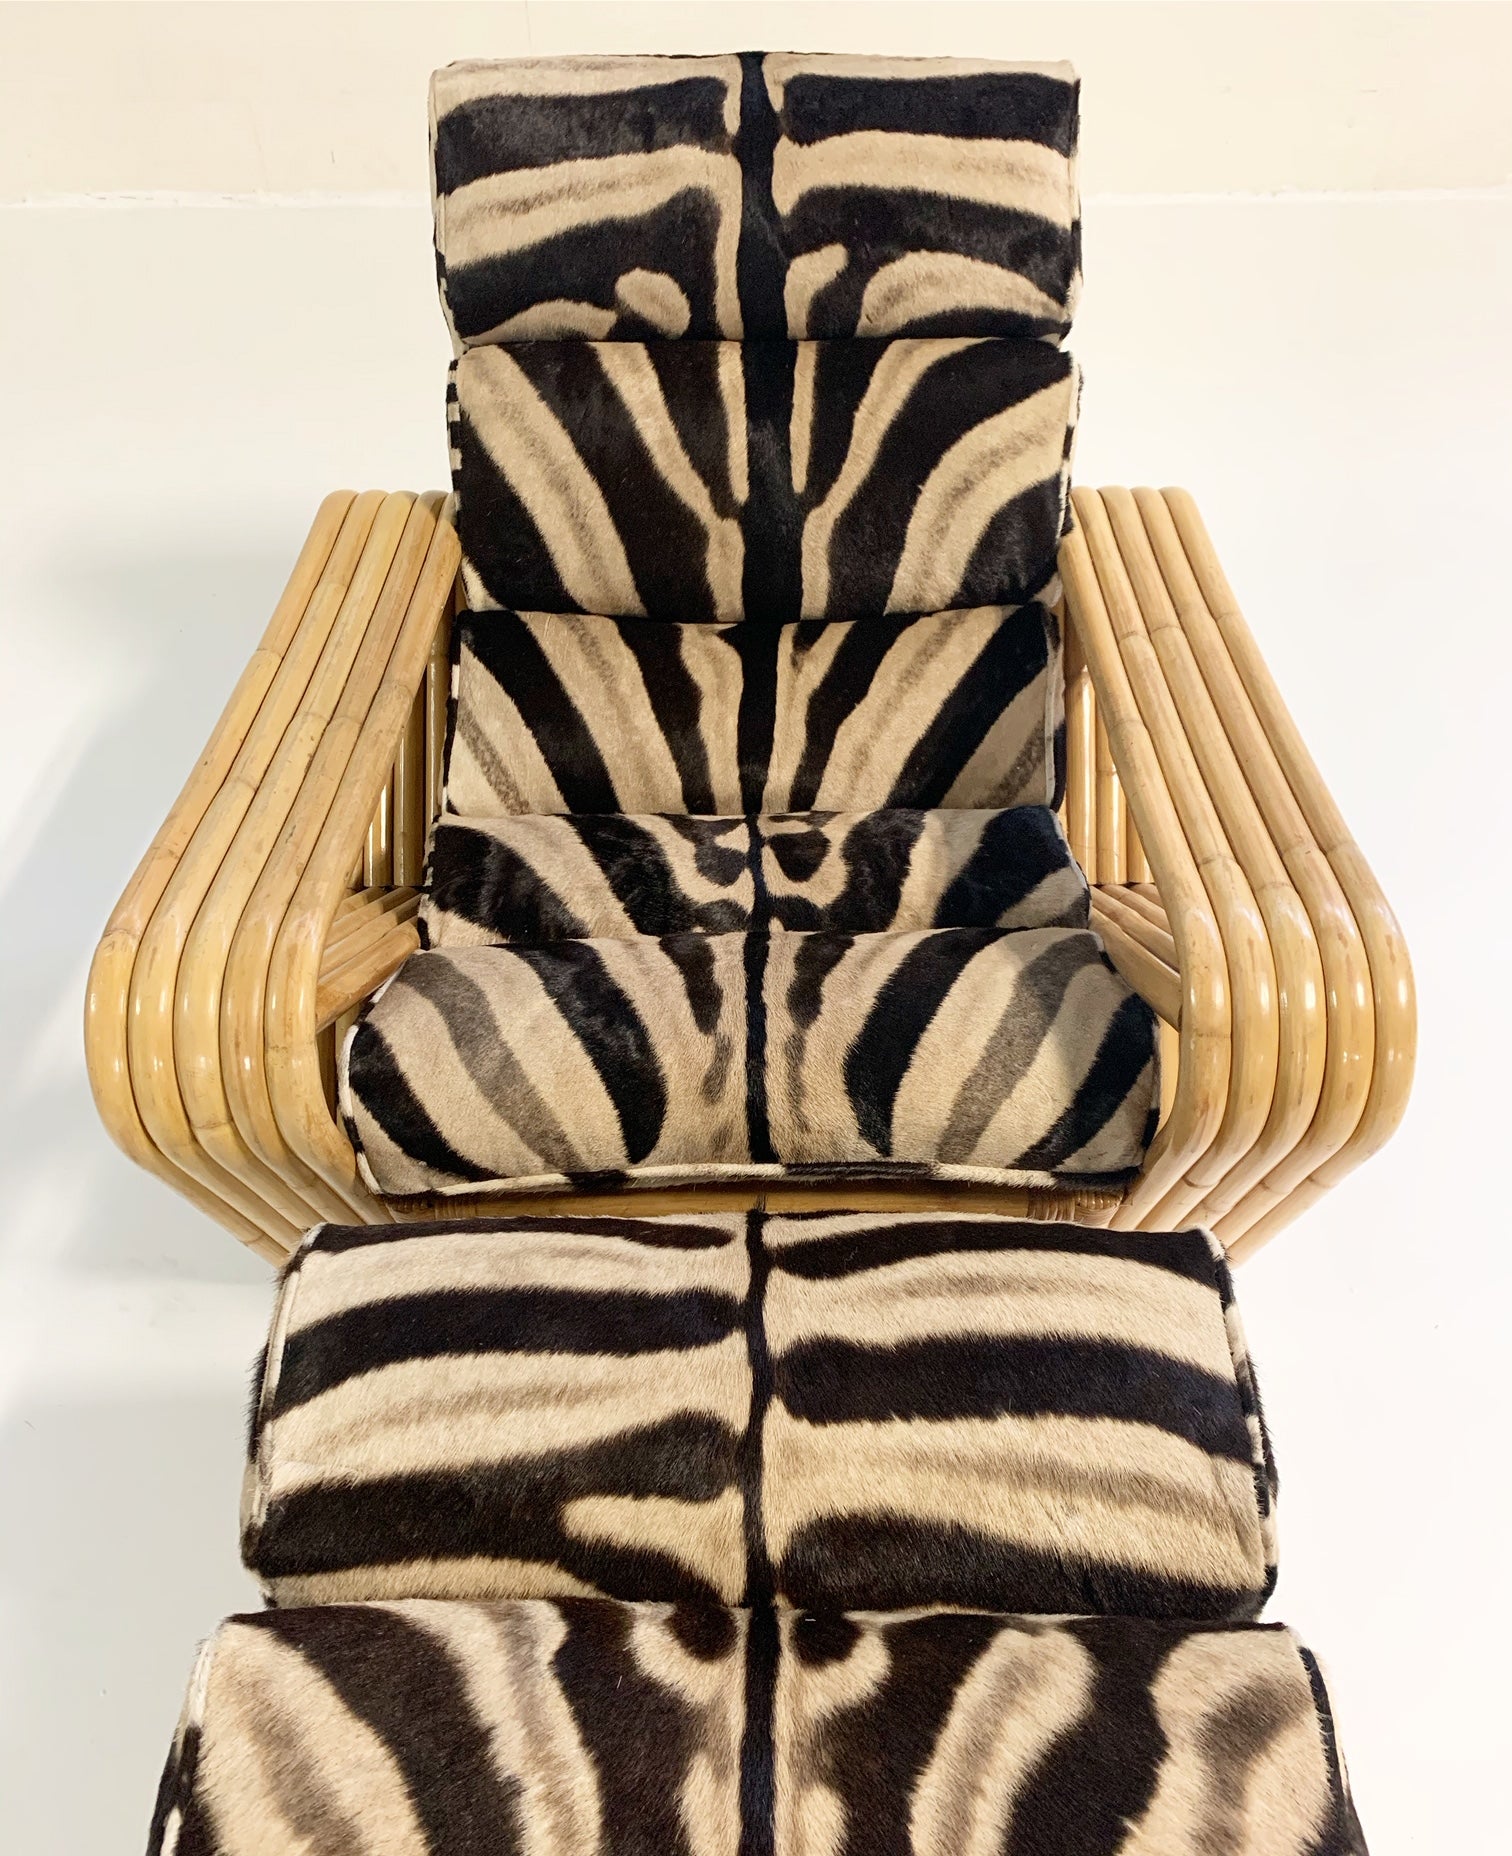 Rattan Lounge Chair and Ottoman in Zebra Hide - FORSYTH